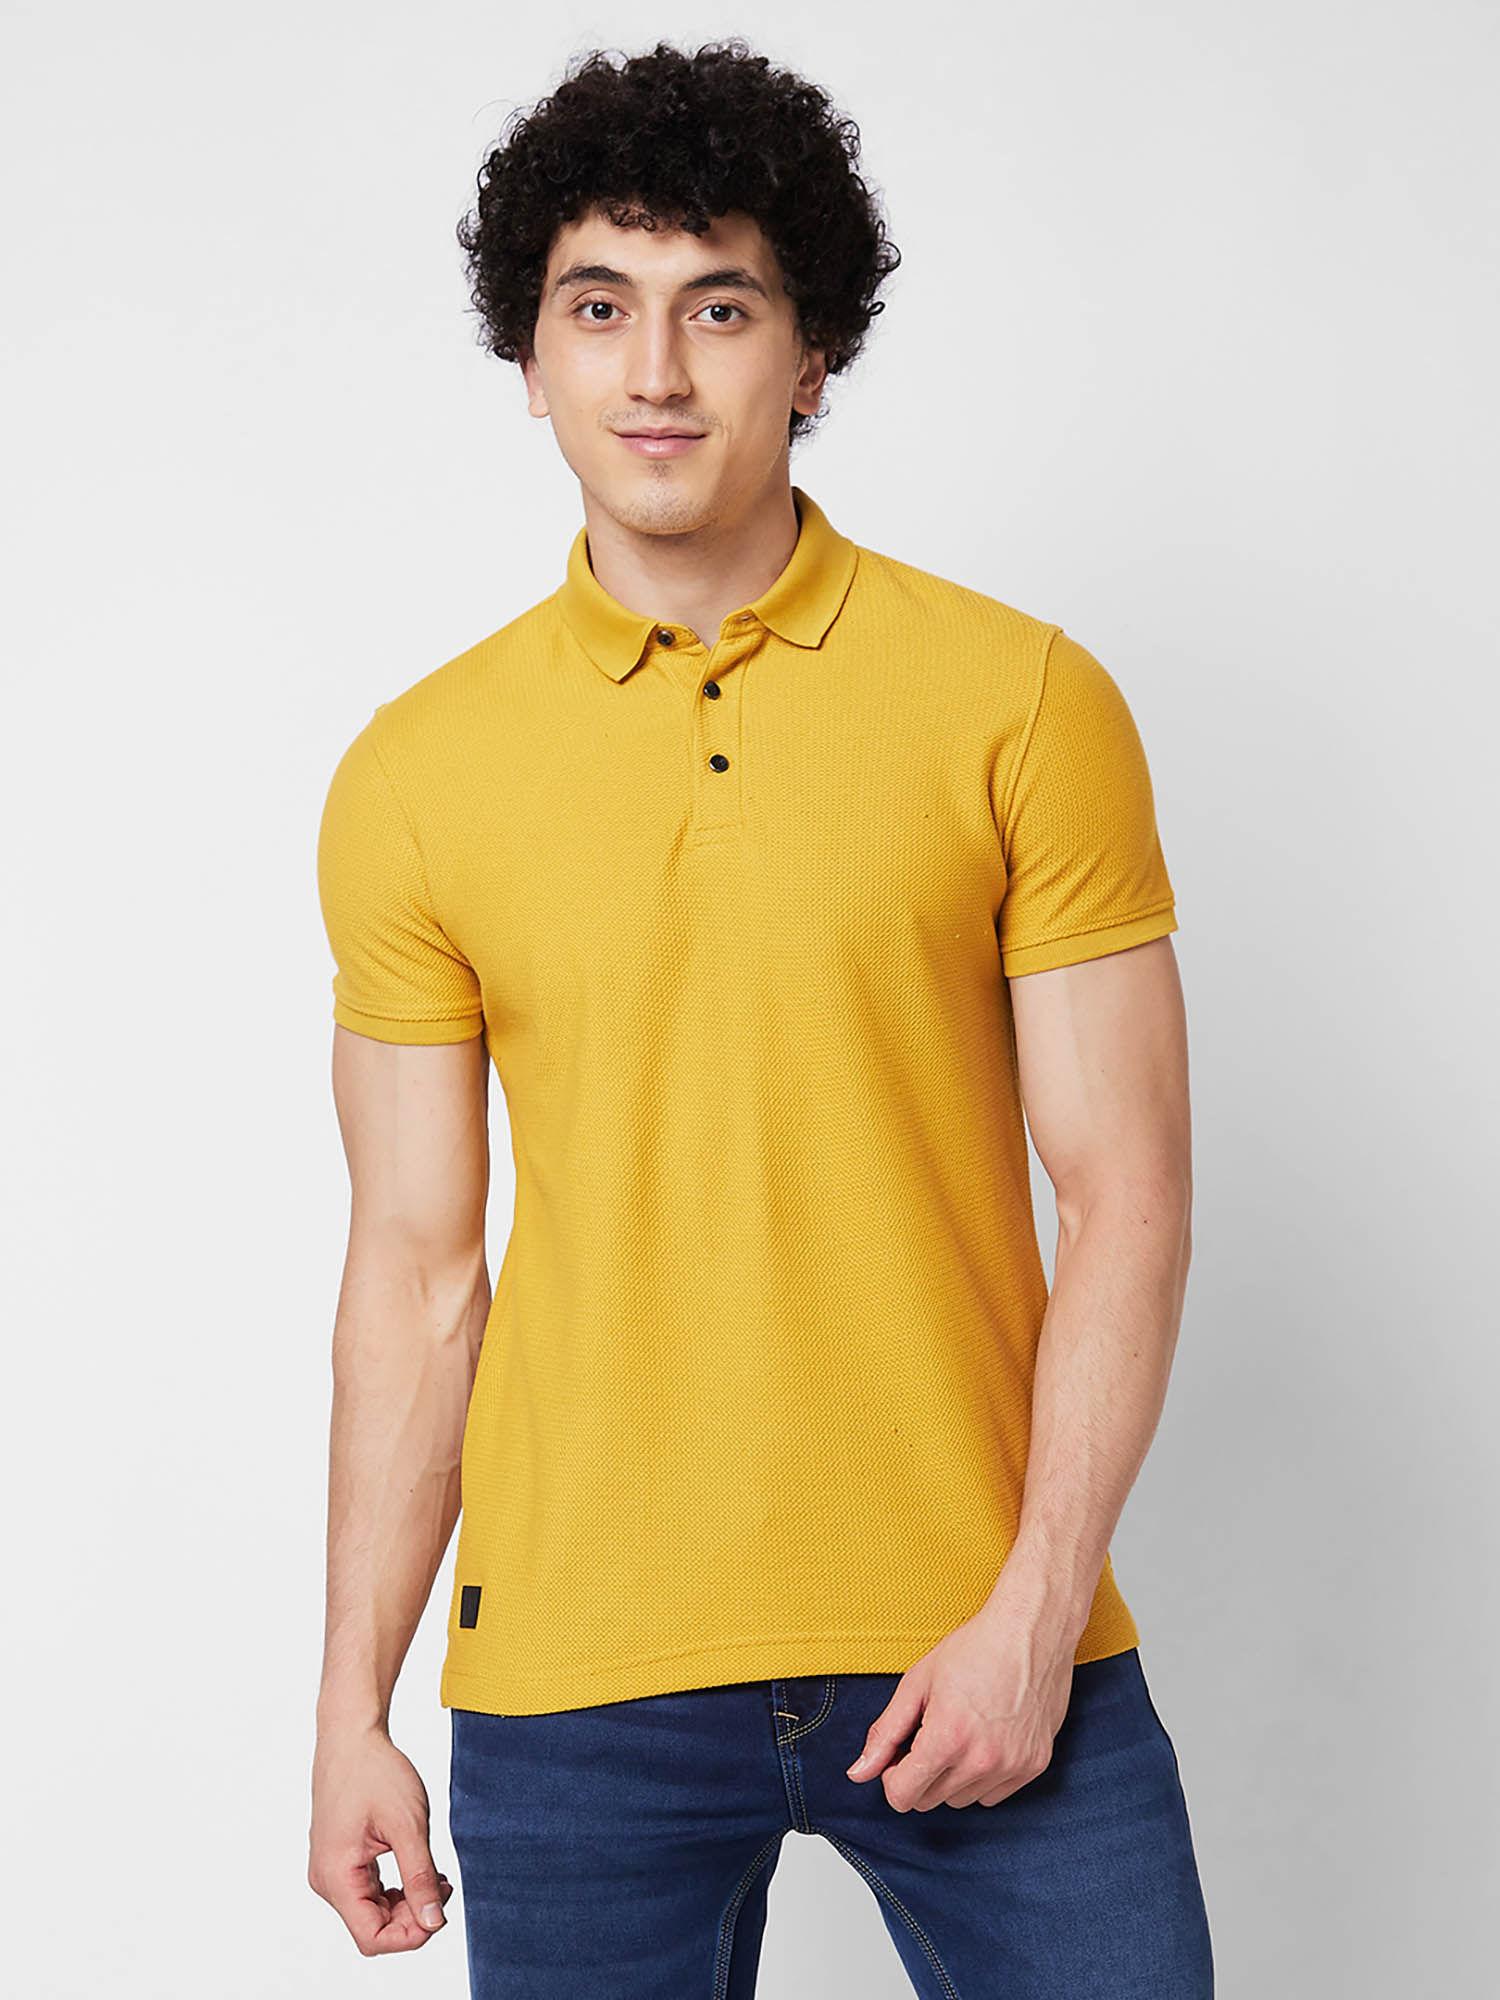 Slim Fit Yellow Polo T-Shirt for Men